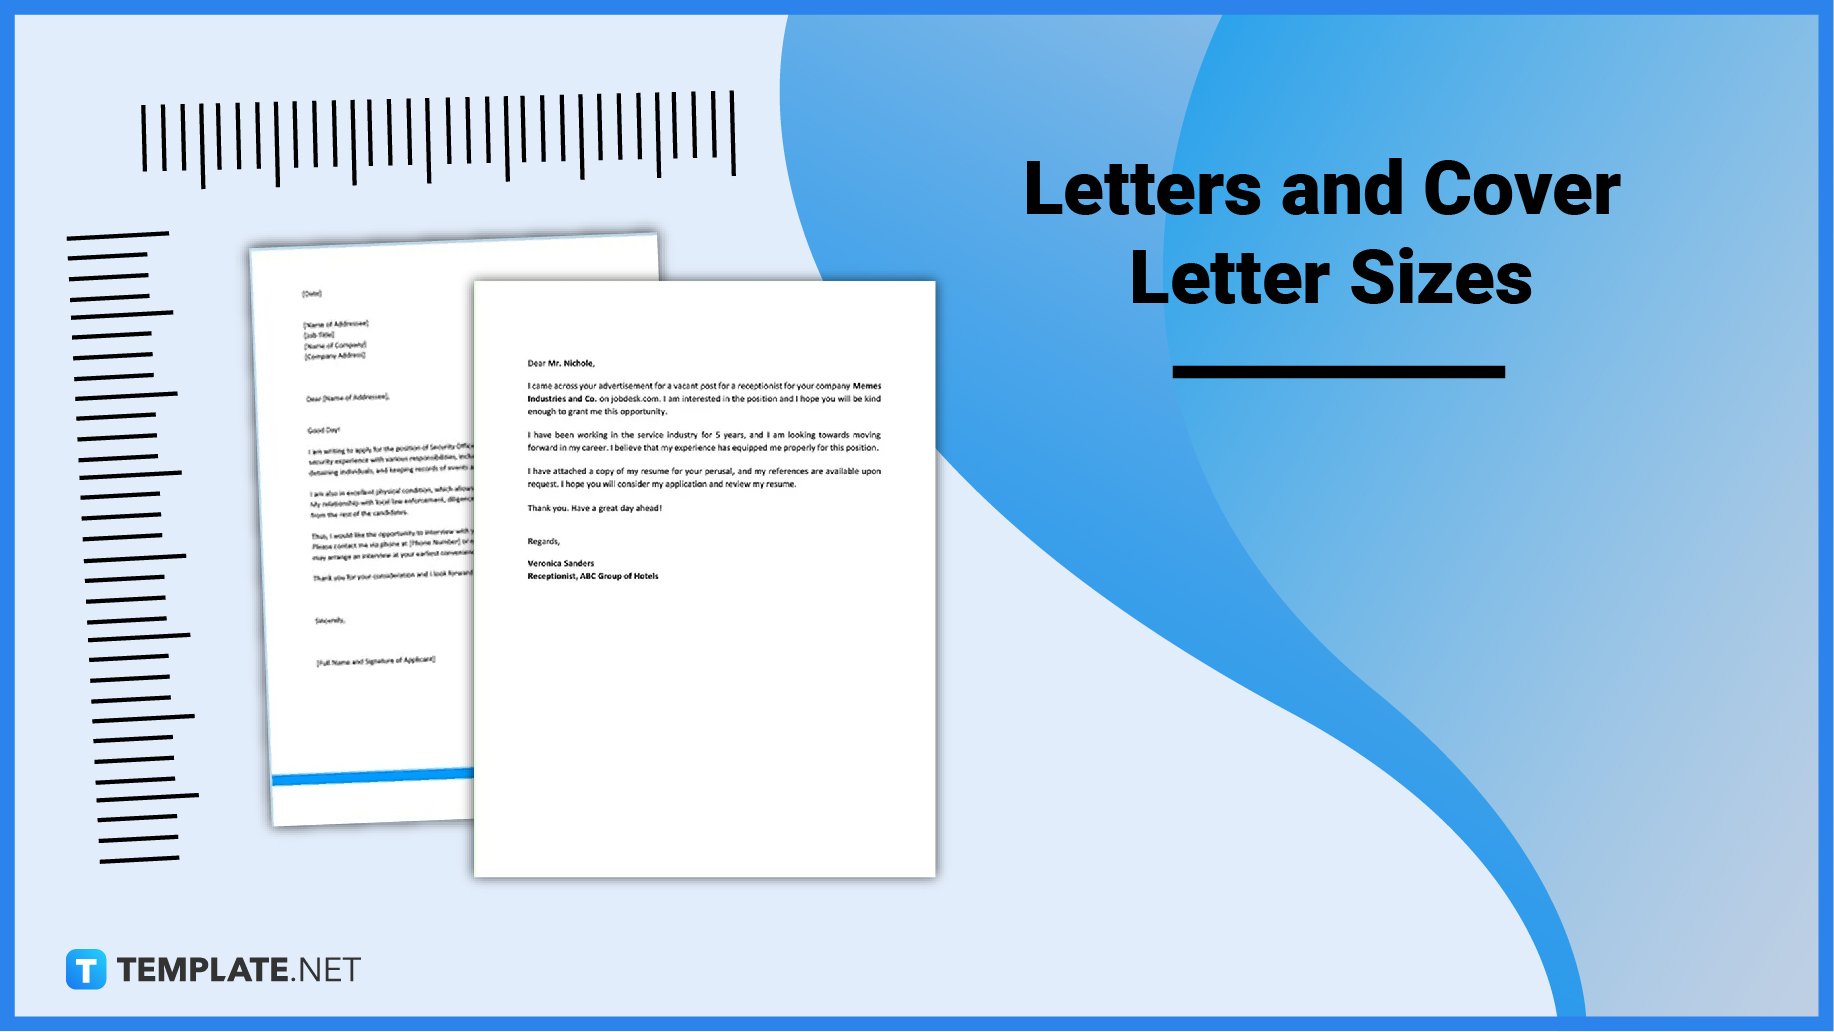 letters-and-cover-letter-sizes